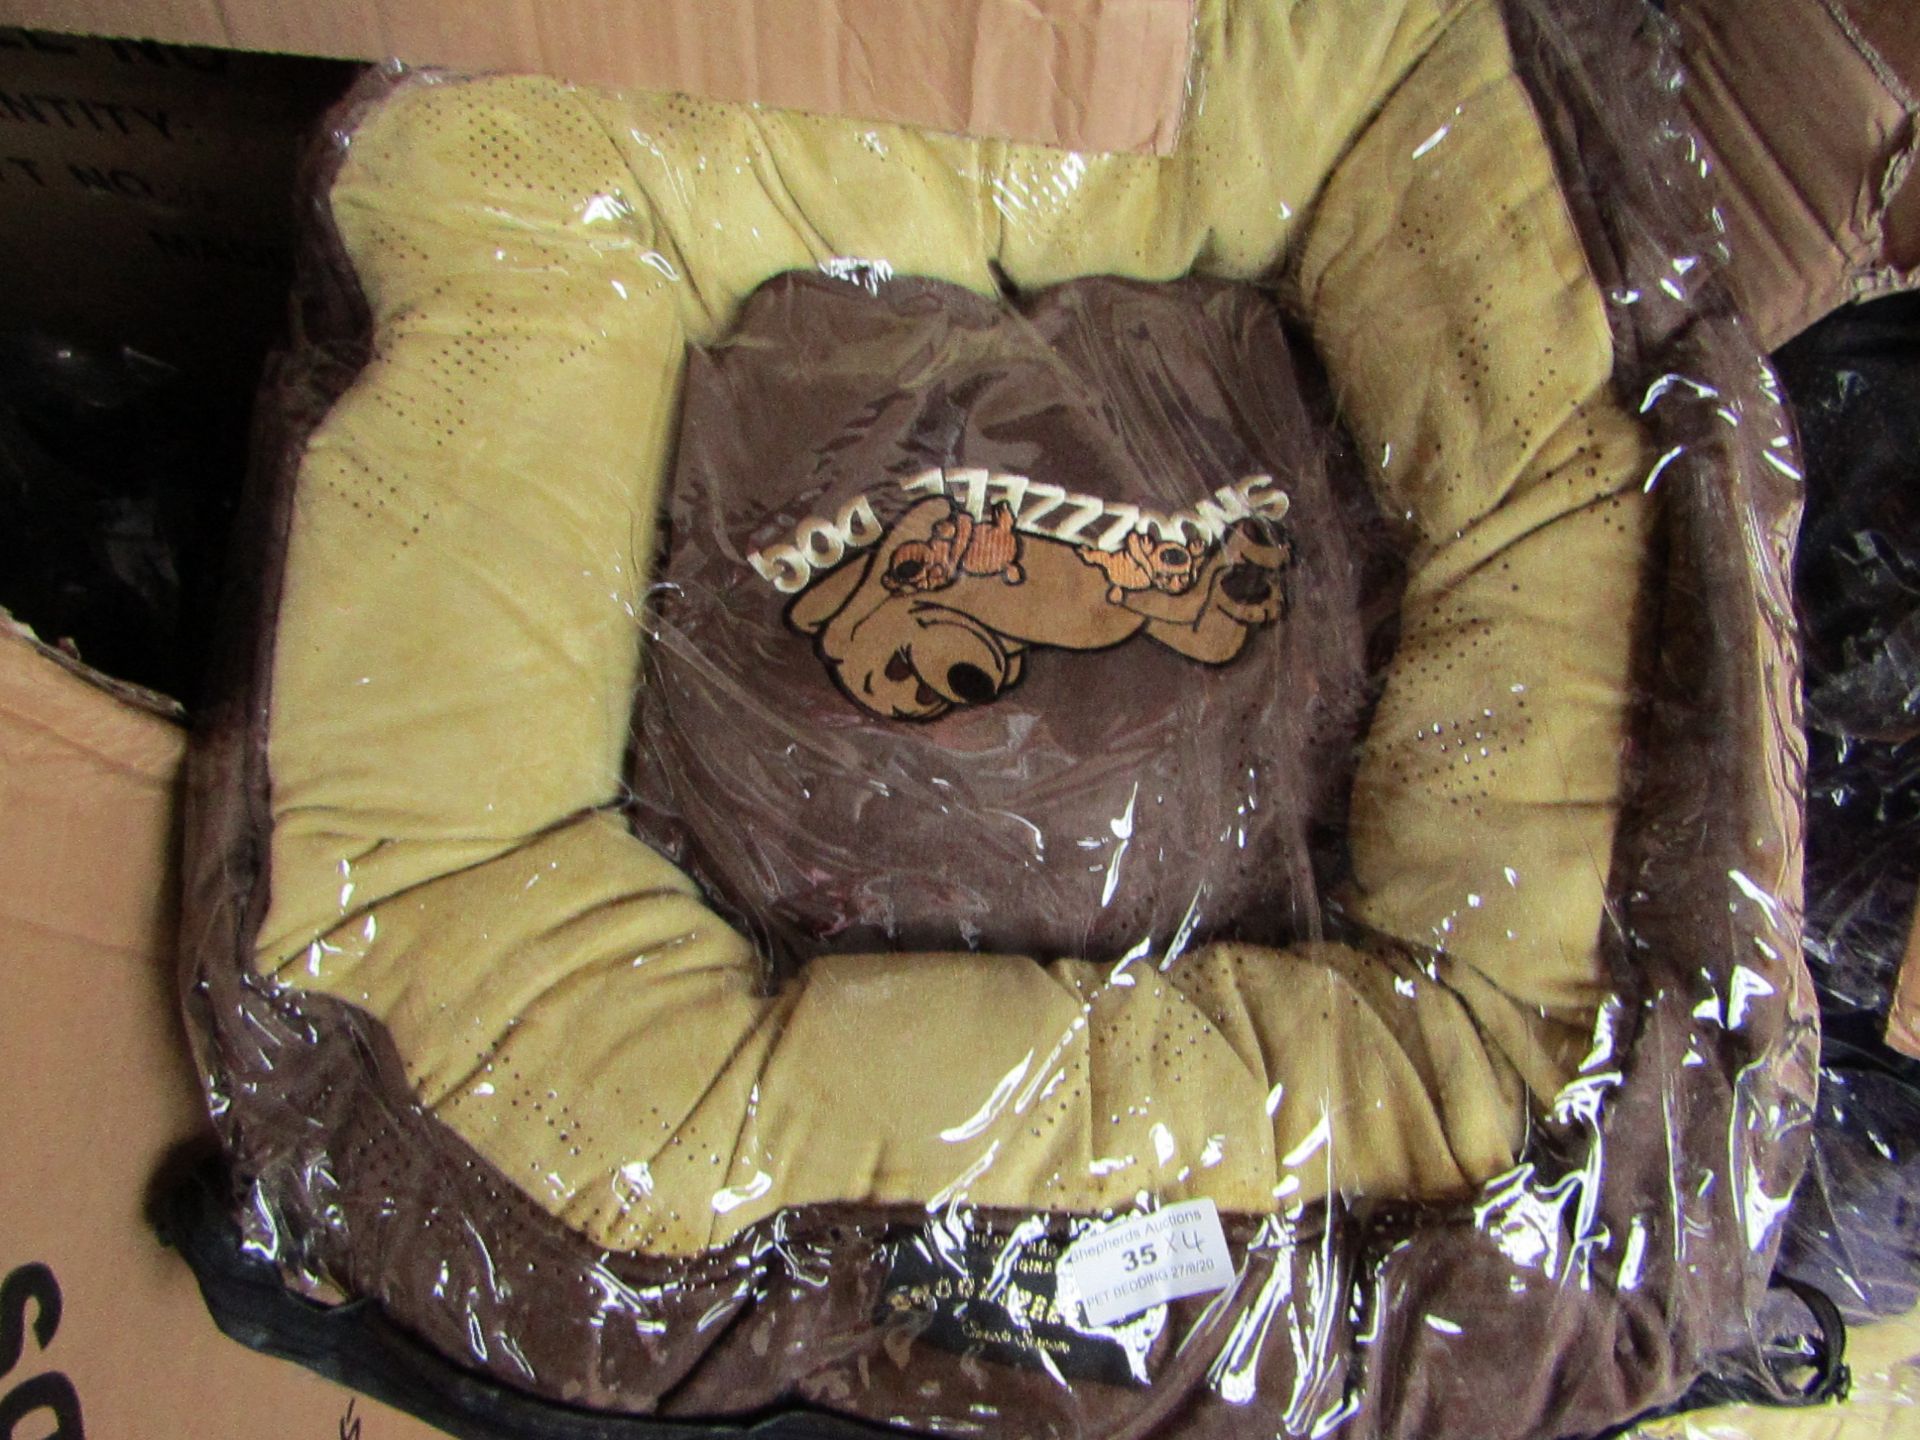 4x Snoozzzeee Dog - Brown Donut Dog Bed (20") - All New & Packaged.